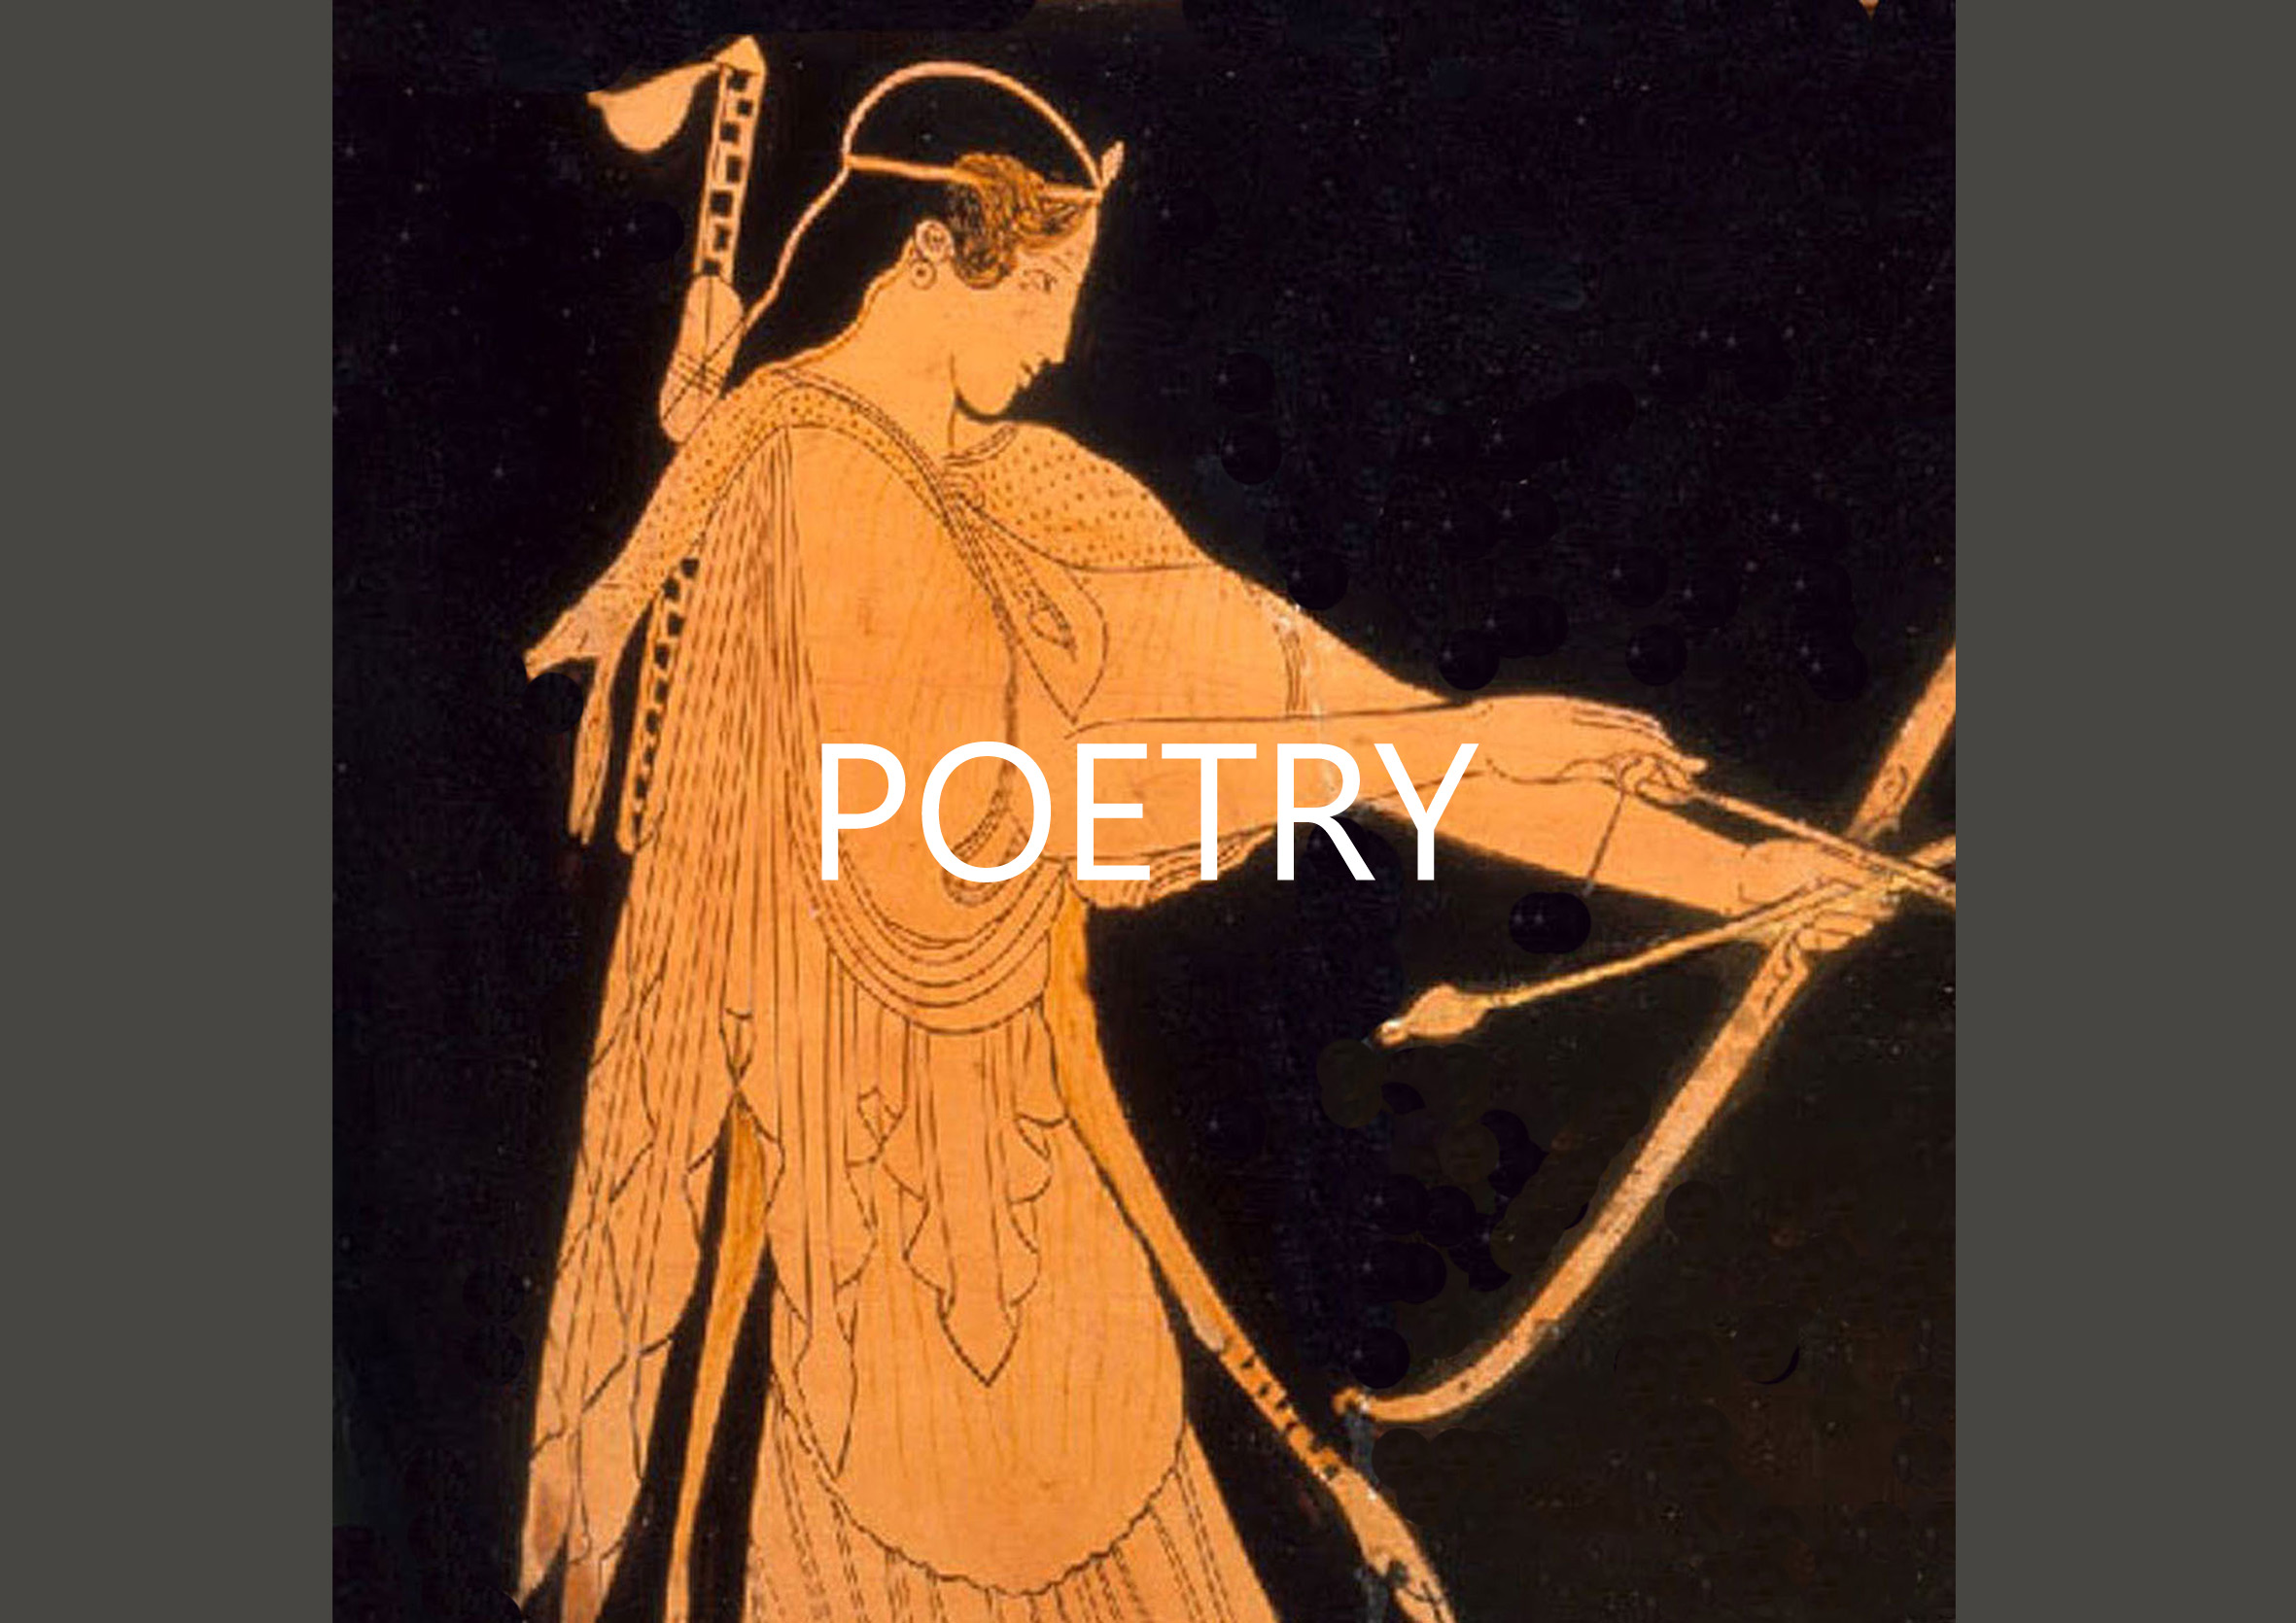 POETRY